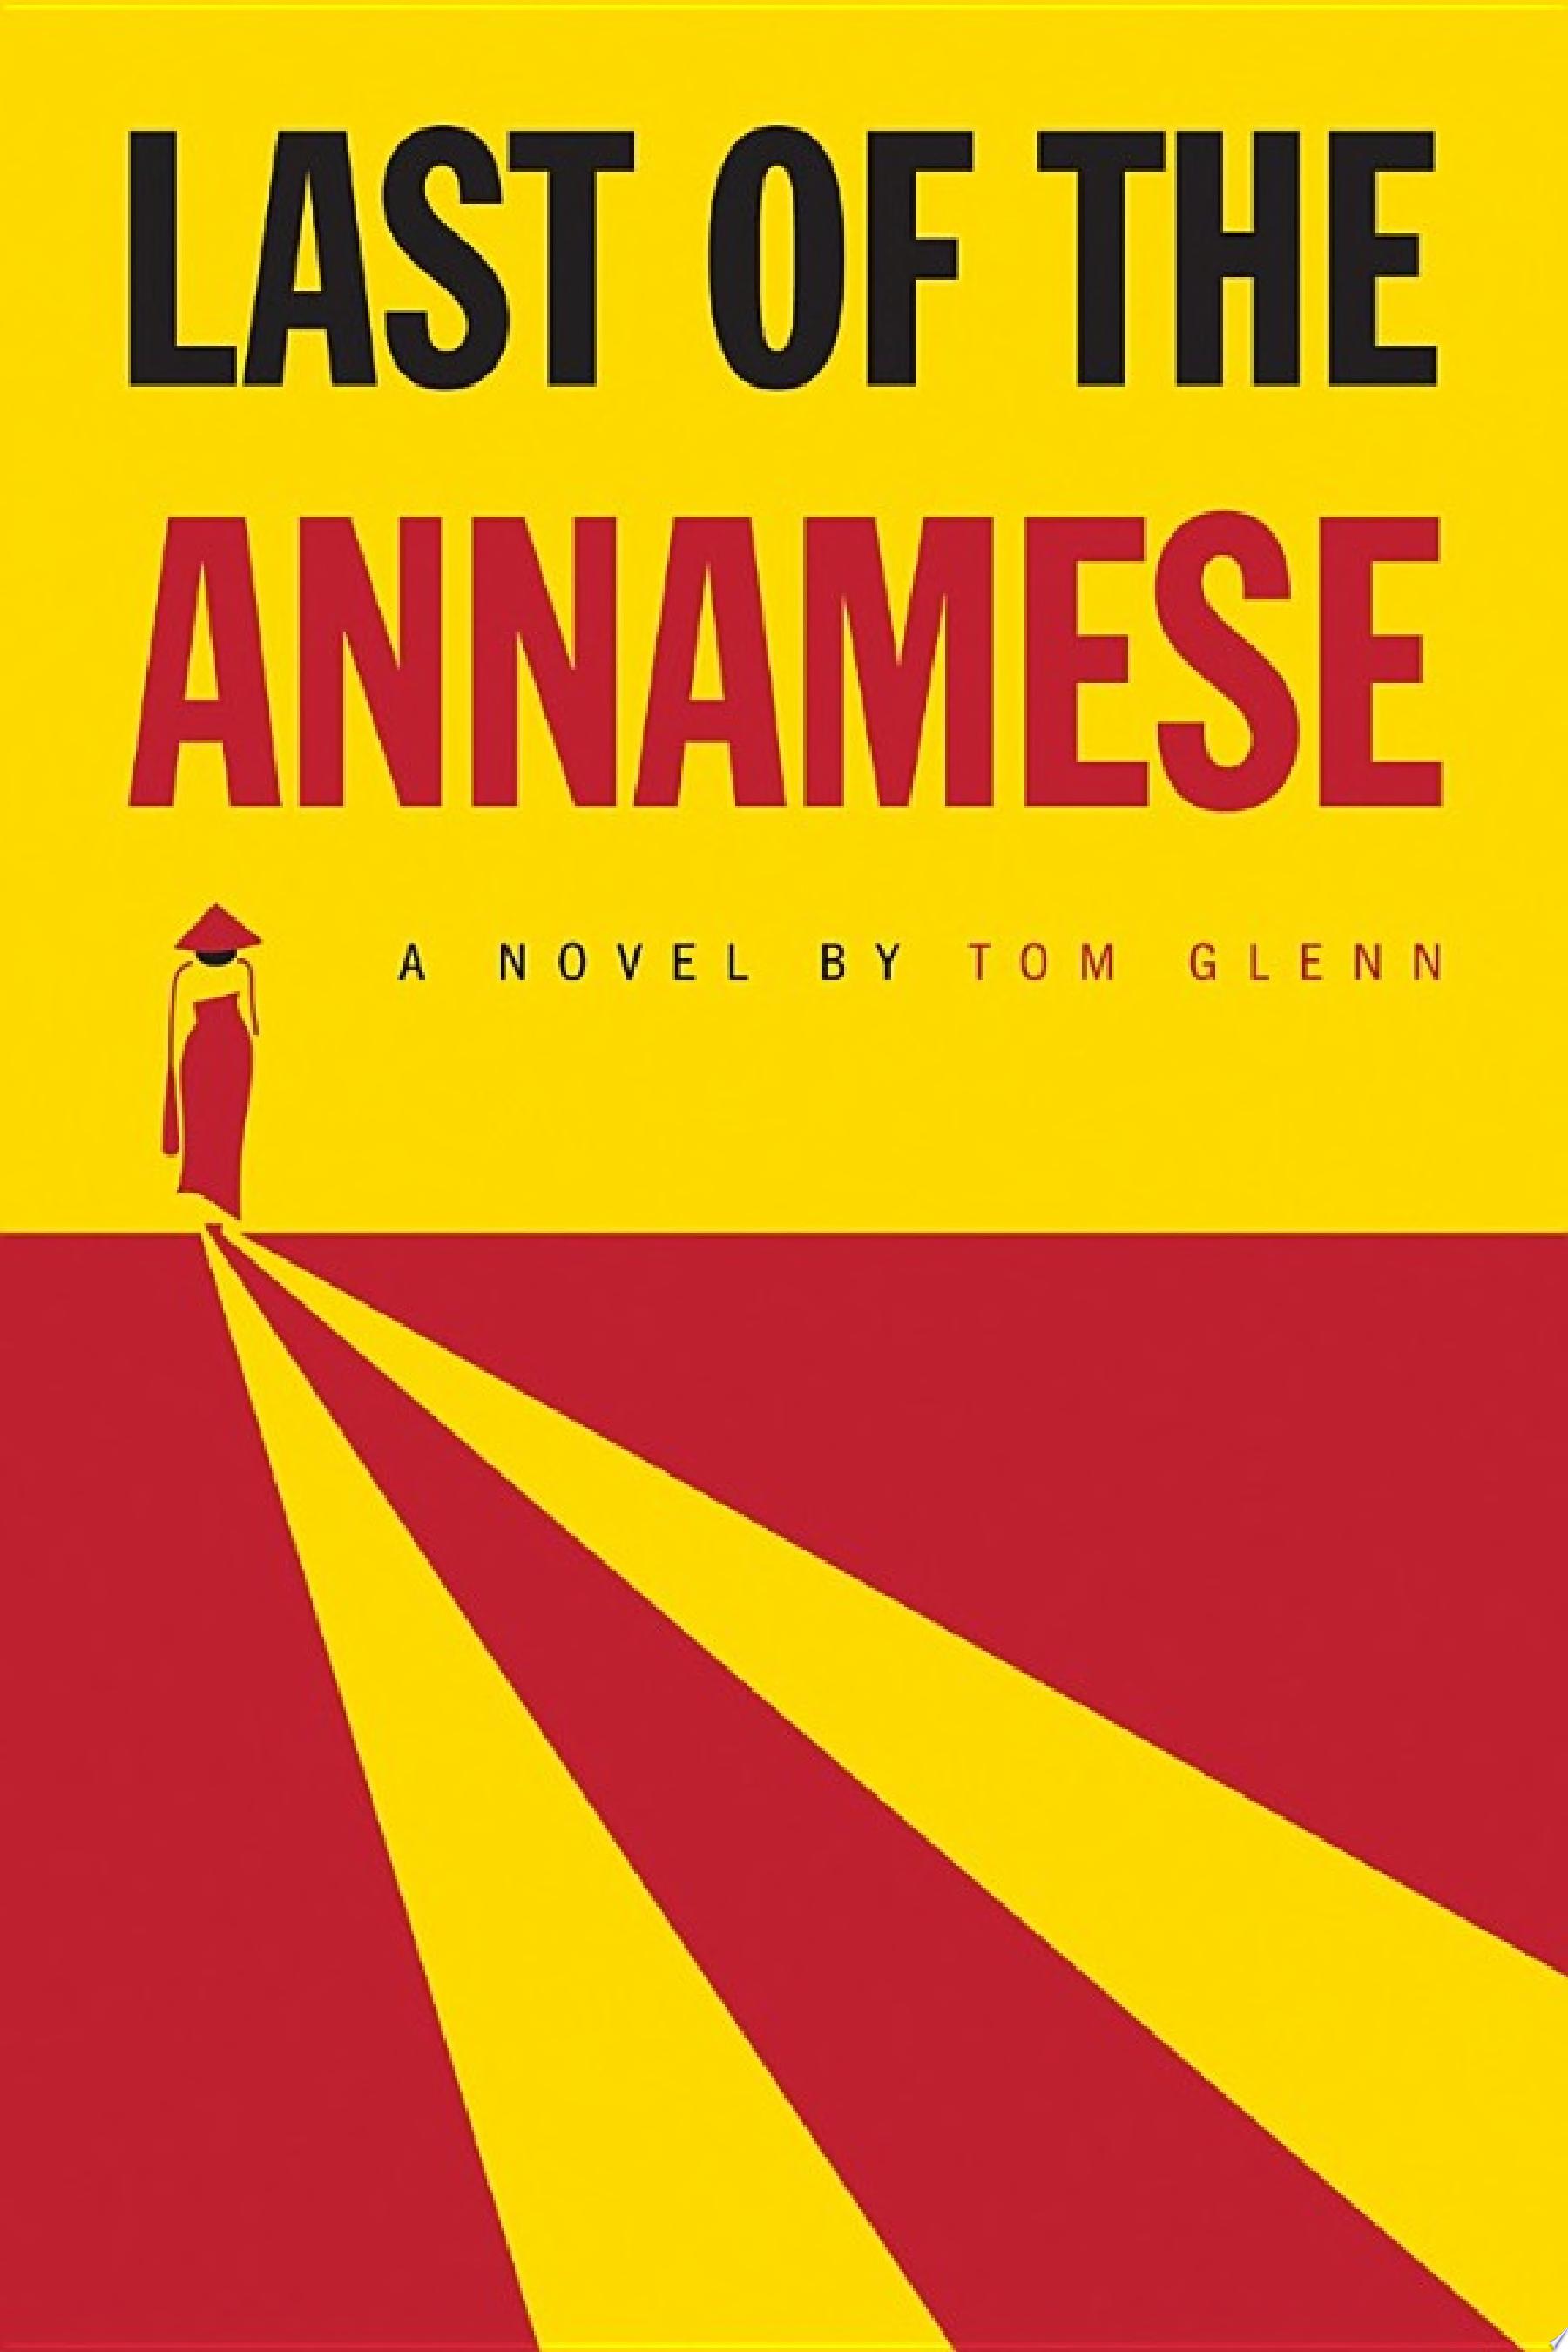 Image for "Last of the Annamese"